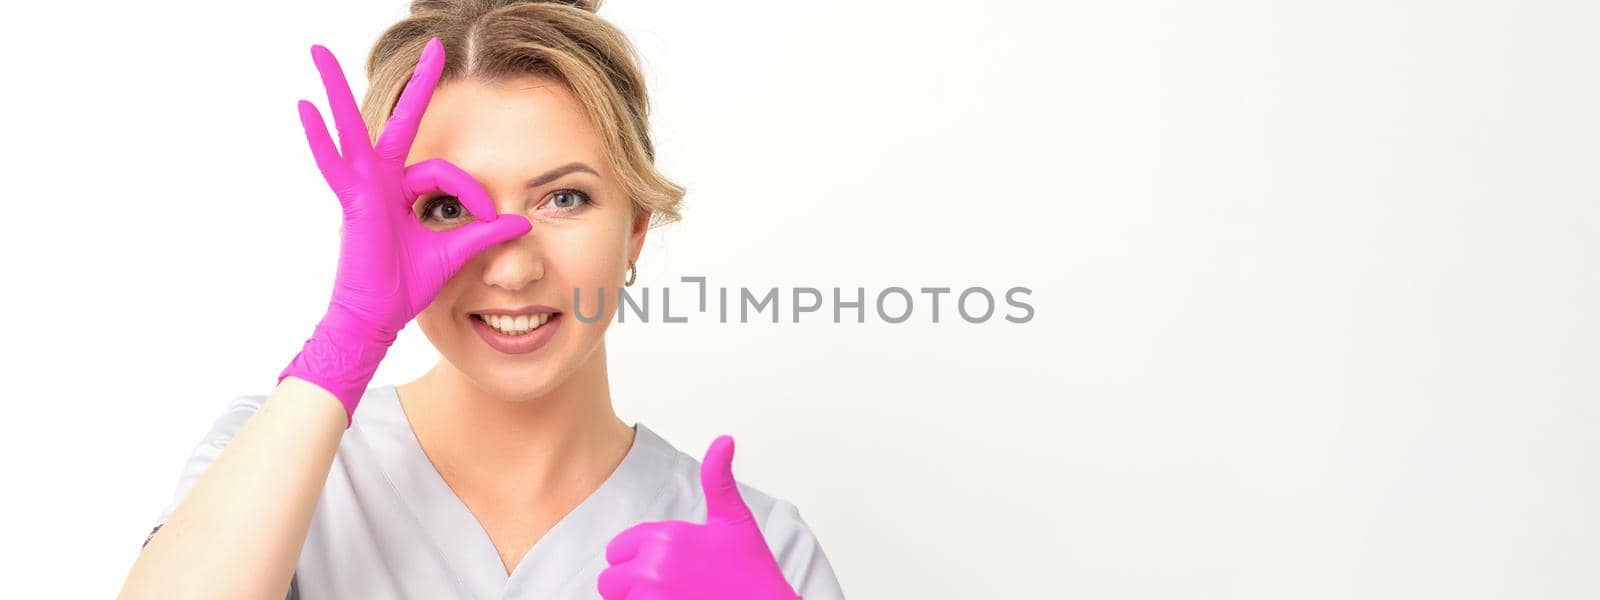 Smiling doctor oculist caucasian woman wearing pink rubber gloves in uniform showing ok sign covering the eye and thumb up gesture against a white background. by okskukuruza